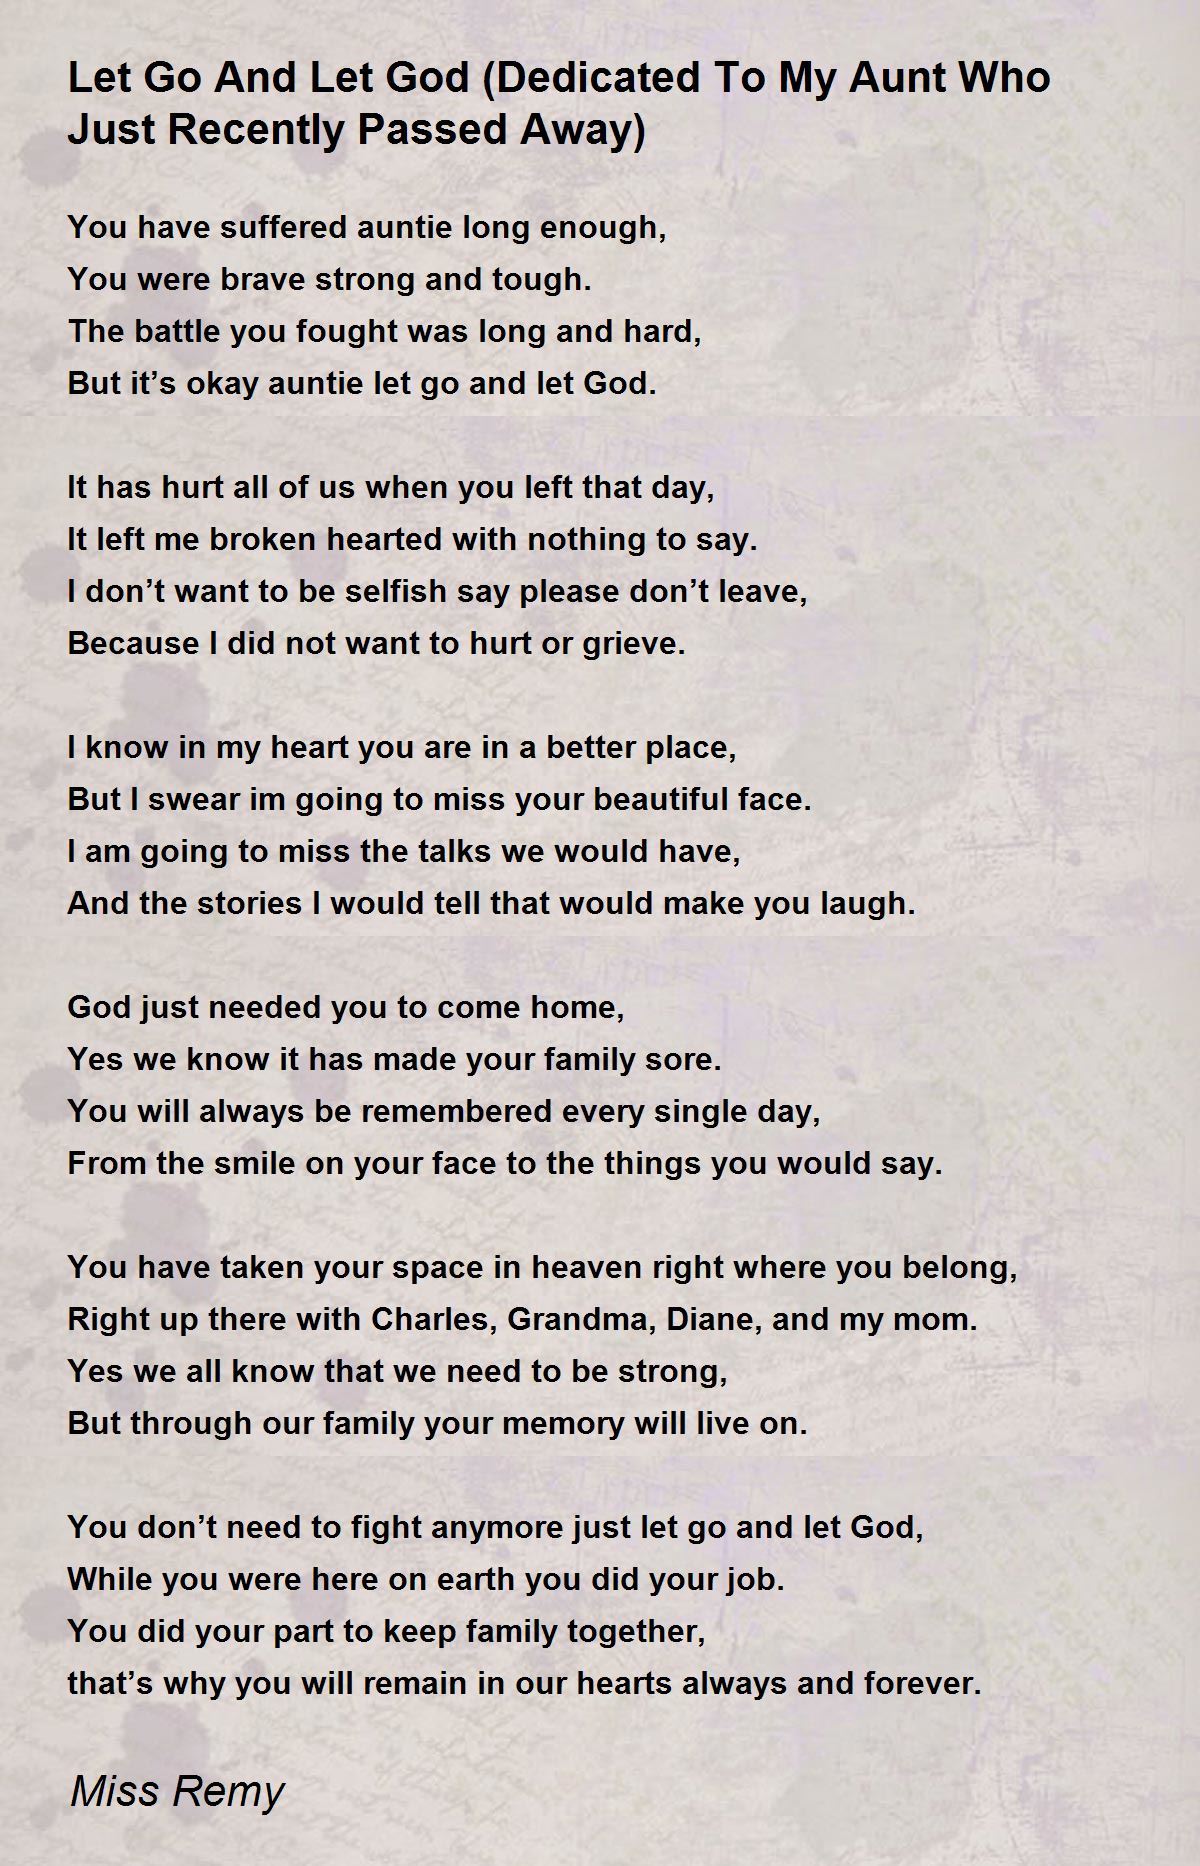 Let Go And Let God Dedicated To My Aunt Who Just Recently Passed Away Poem By Miss Remy Poem